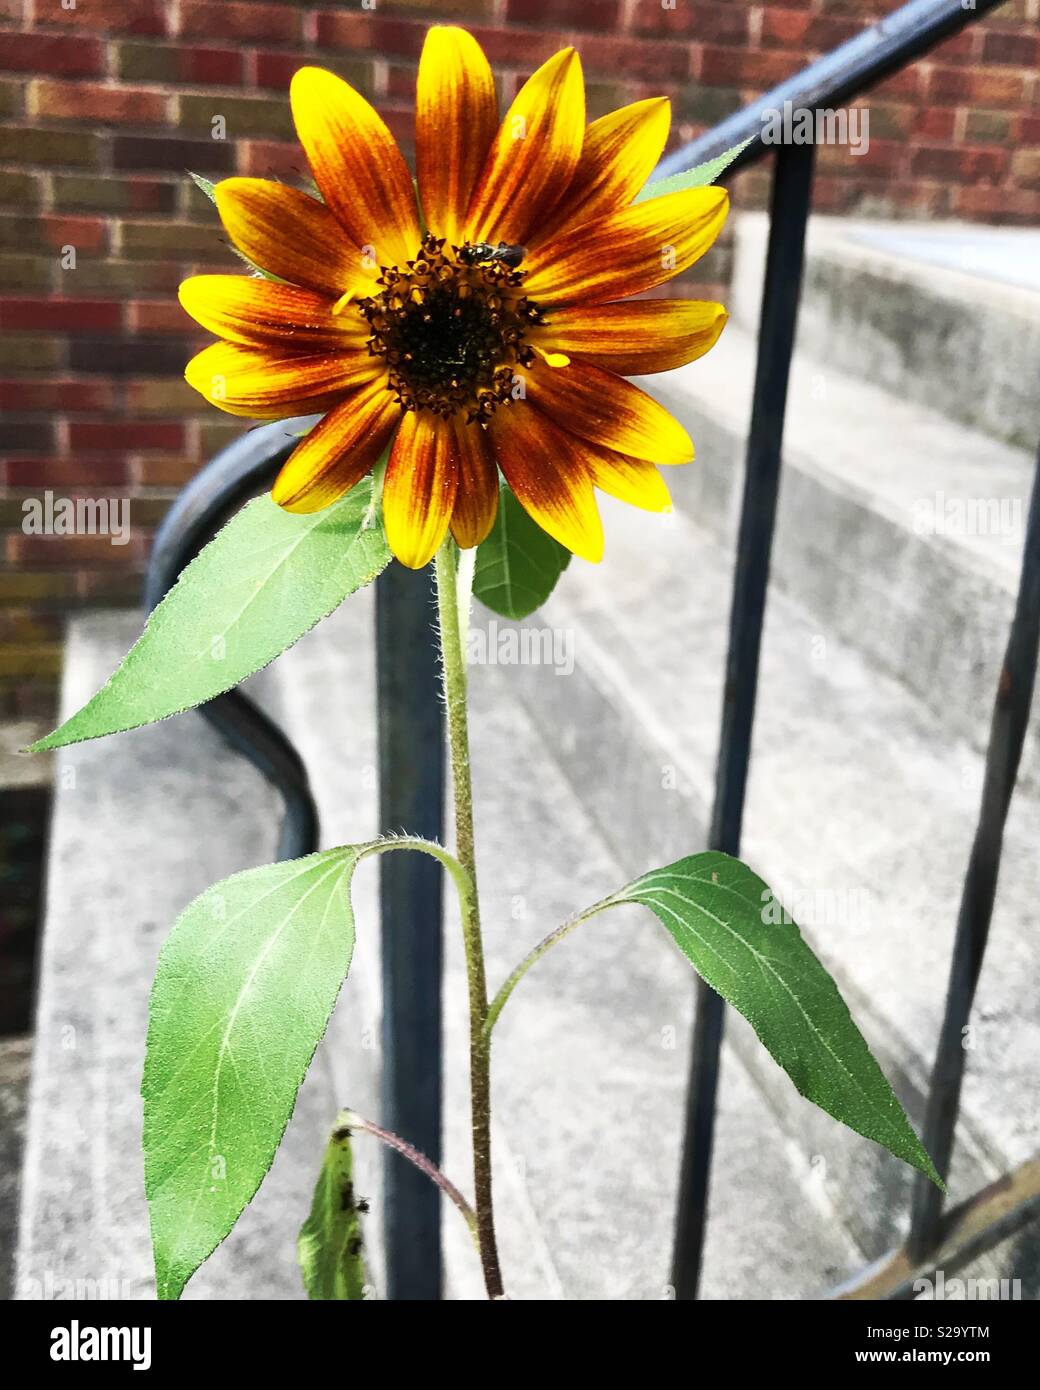 Red orange and yellow sunflower blooming by concrete steps Stock Photo